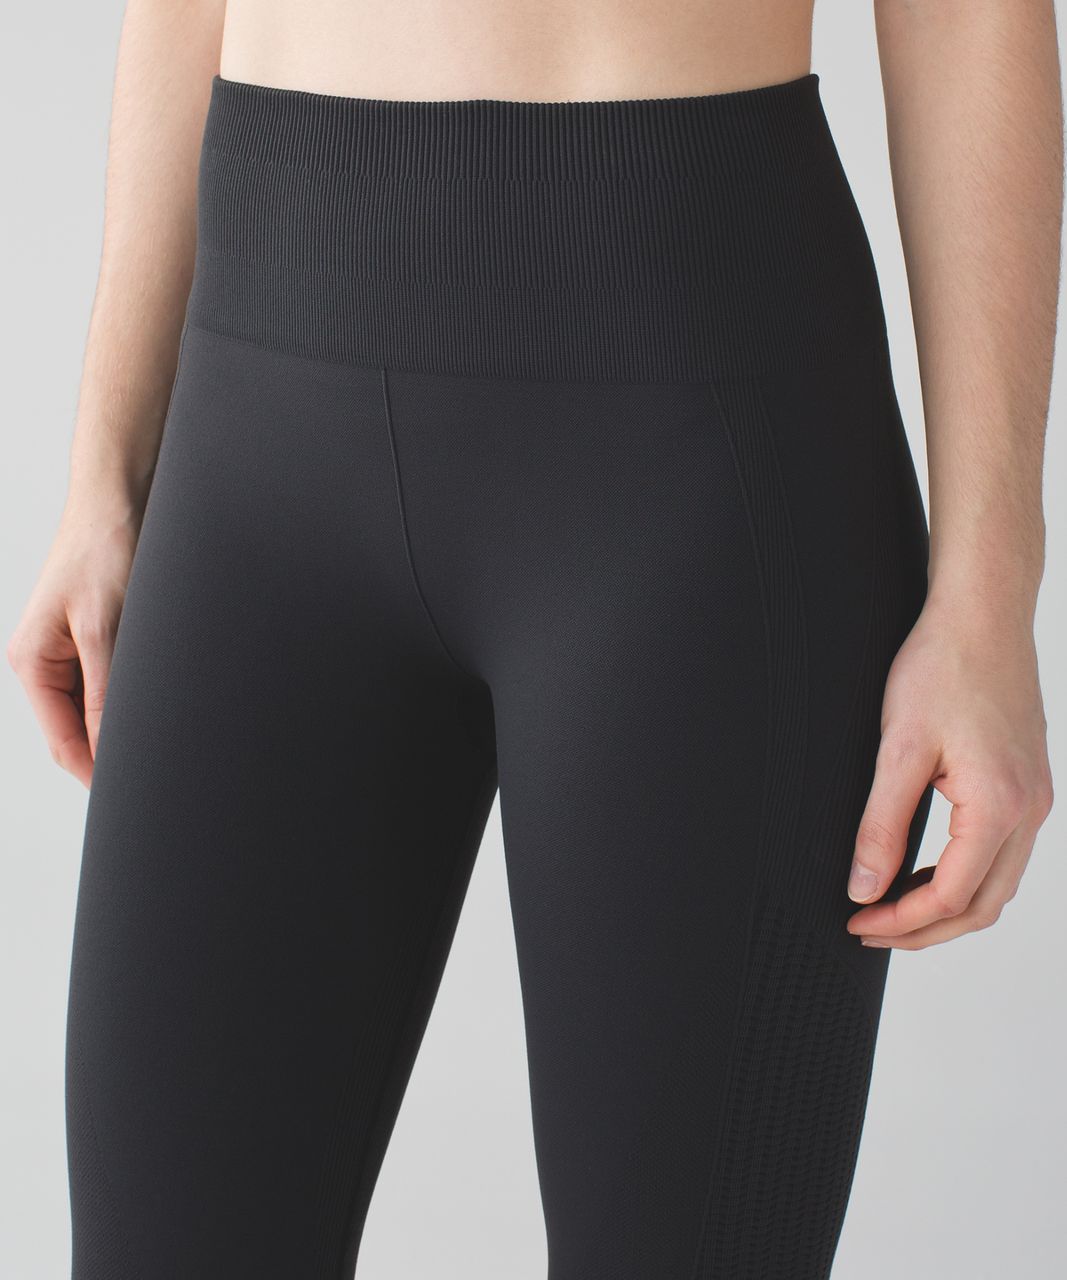 Lululemon In The Flow Cropped Navy Seamless Crop 6  Leggings are not  pants, Pants for women, Cropped leggings